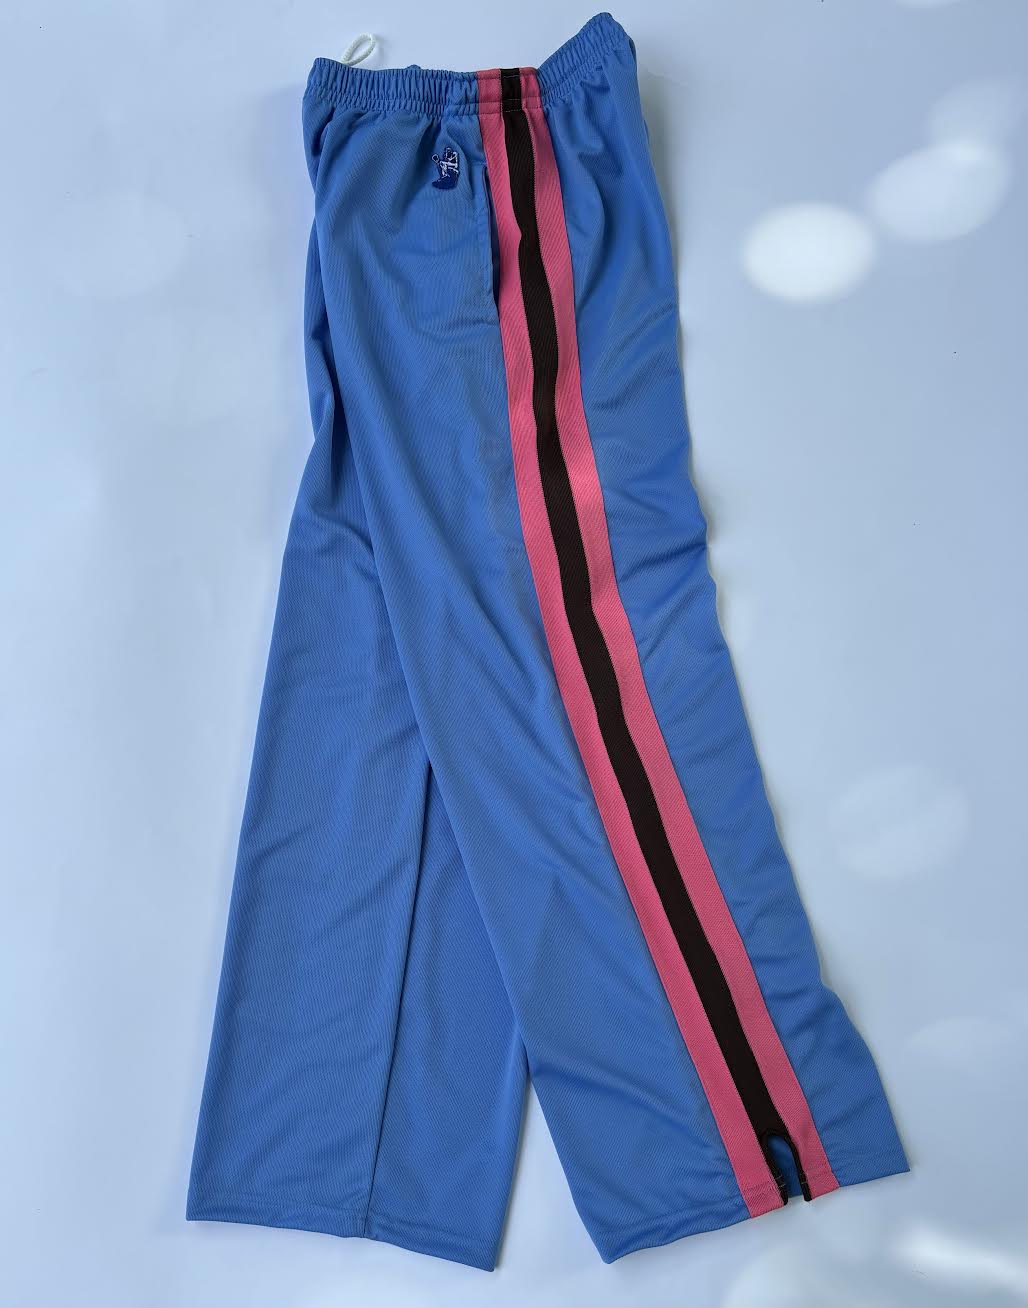 SUMMER LAX PANT in Light Blue LITE WEIGHT Miracle Mesh* w/ Hot Pink, Brown, Hot Pink Knit Stripes